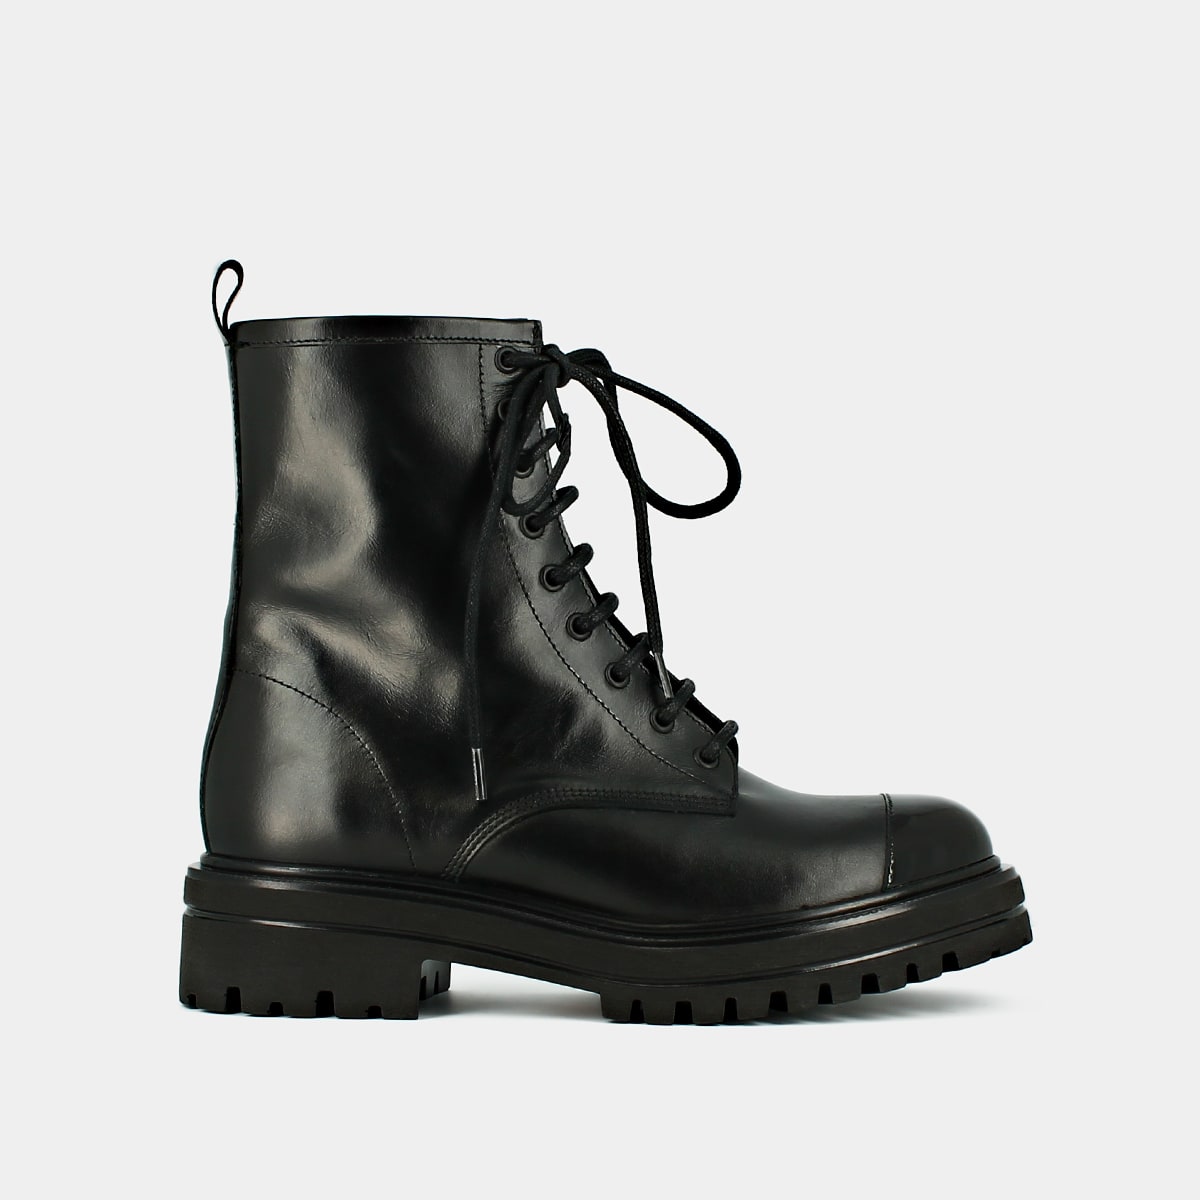 Boots with notched soles and laces in black varnish and leather